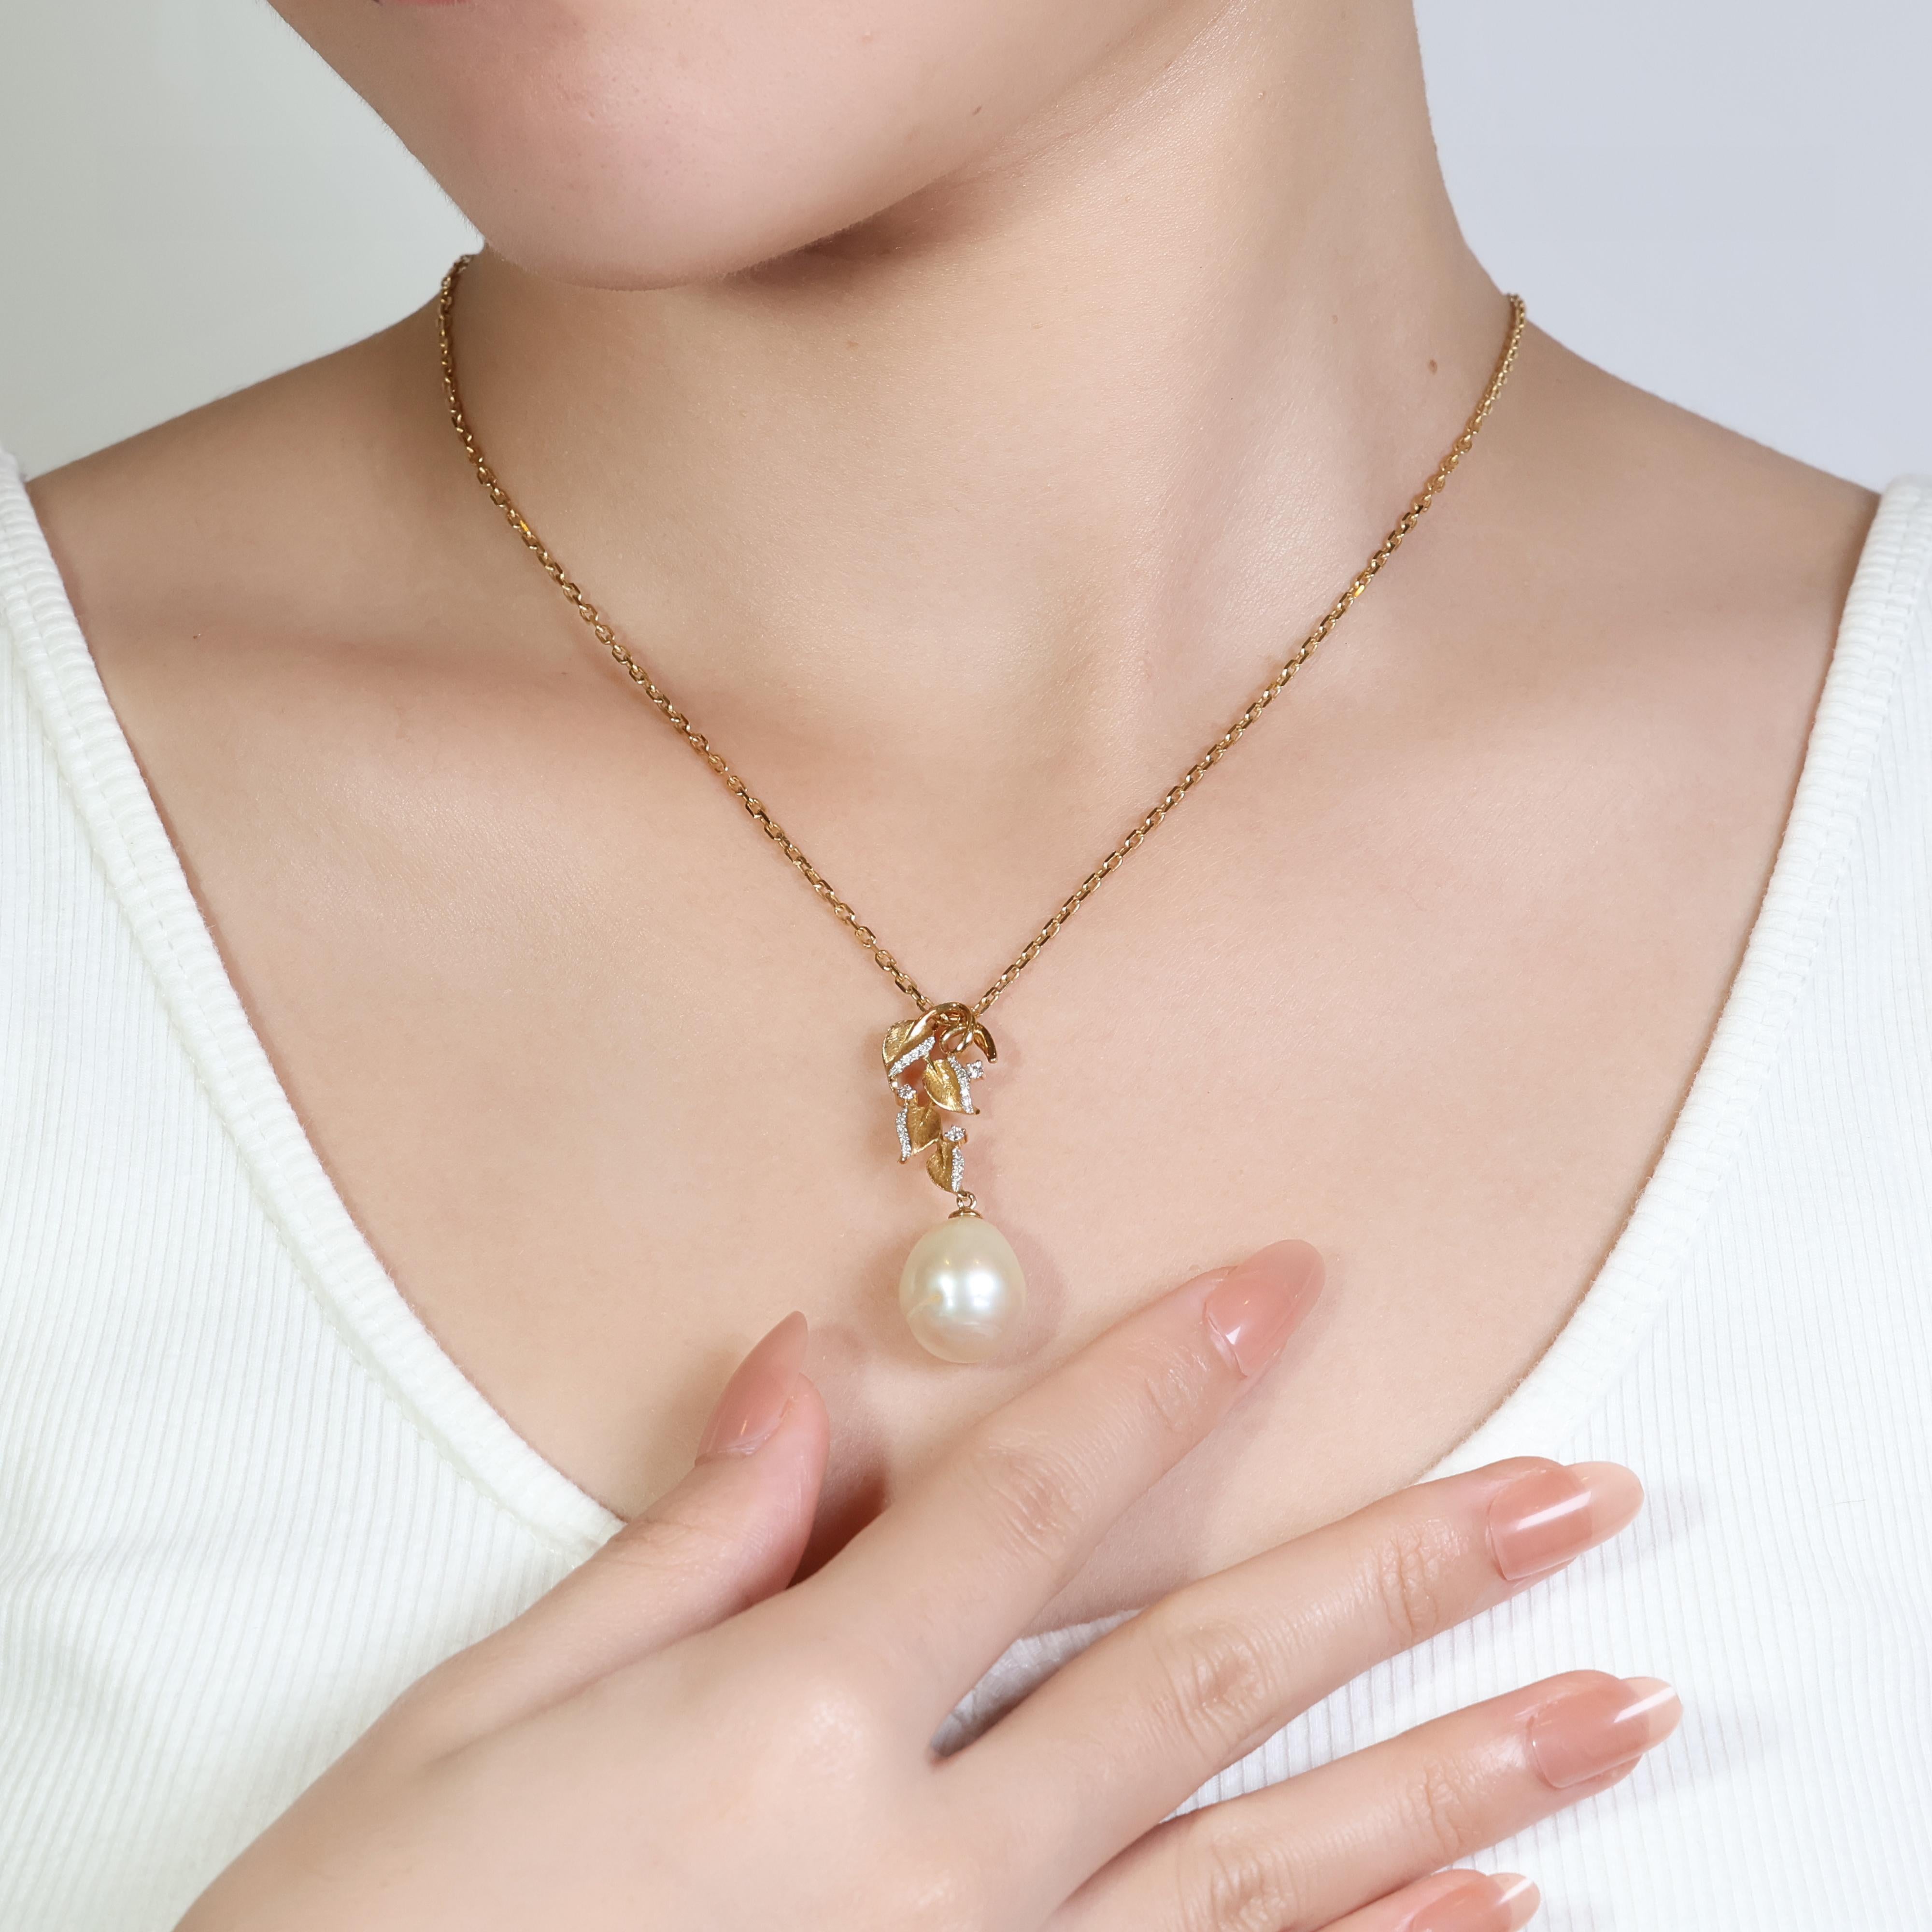 Splendid 18k Yellow Gold Pendant w/0.1 Carat Pearl & Diamonds-Chain not included For Sale 7